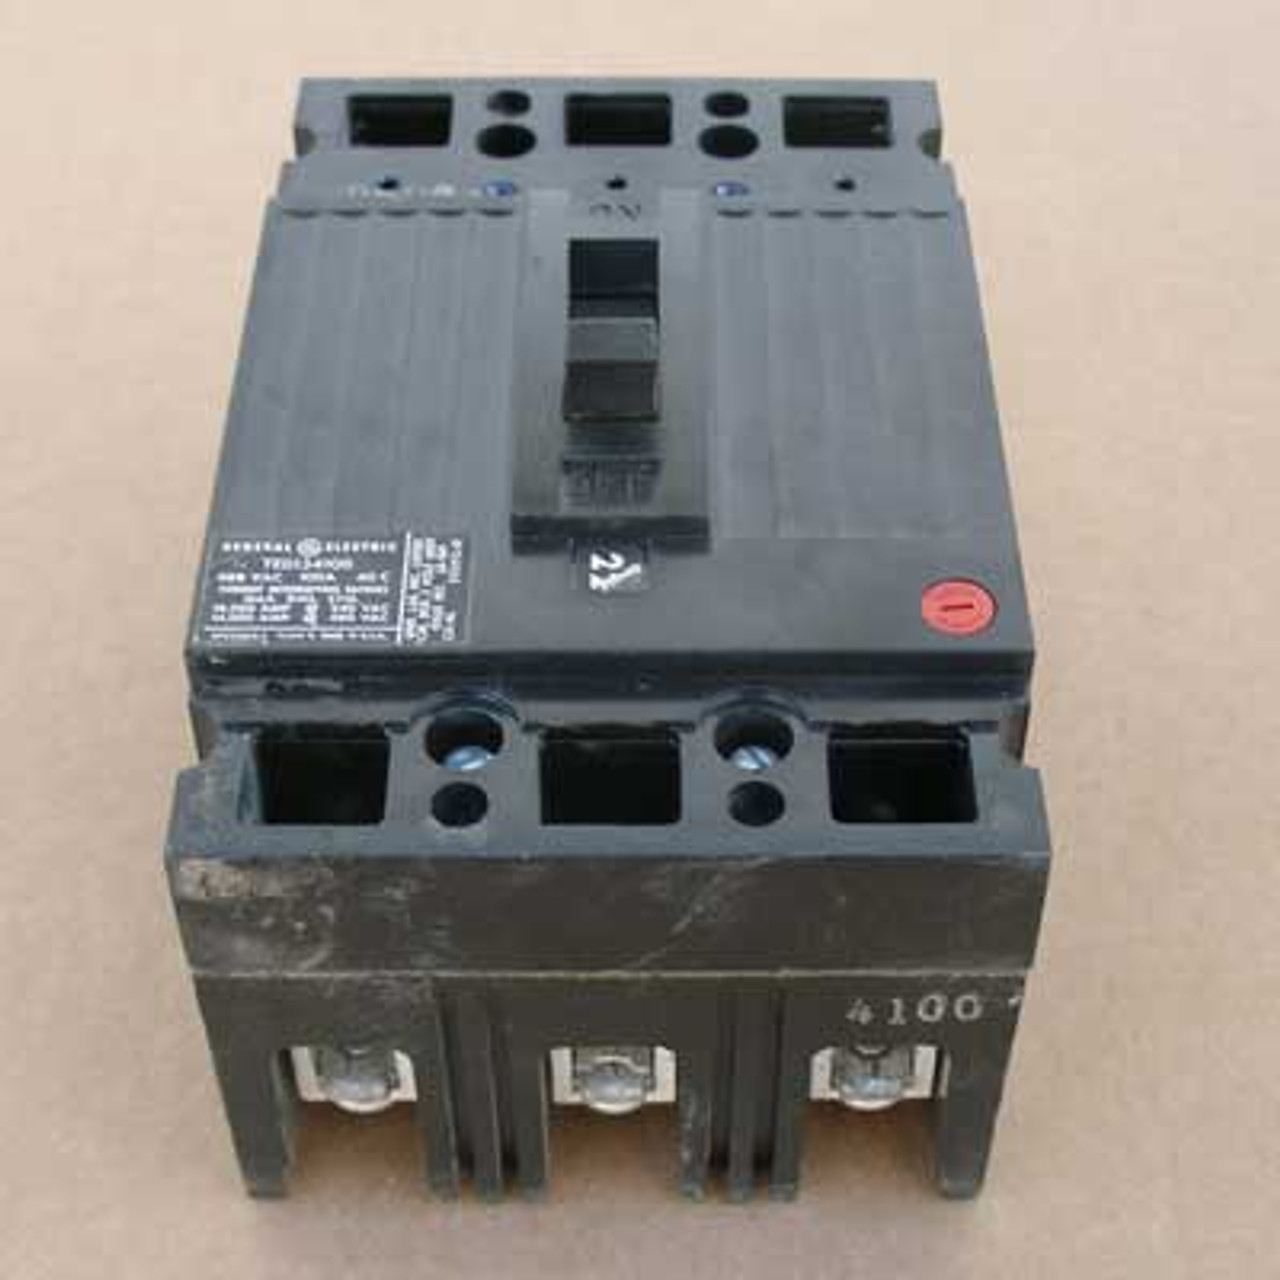 General Electric TED134100 3 Pole 100 Amp 480V Circuit Breaker Black Face - Used